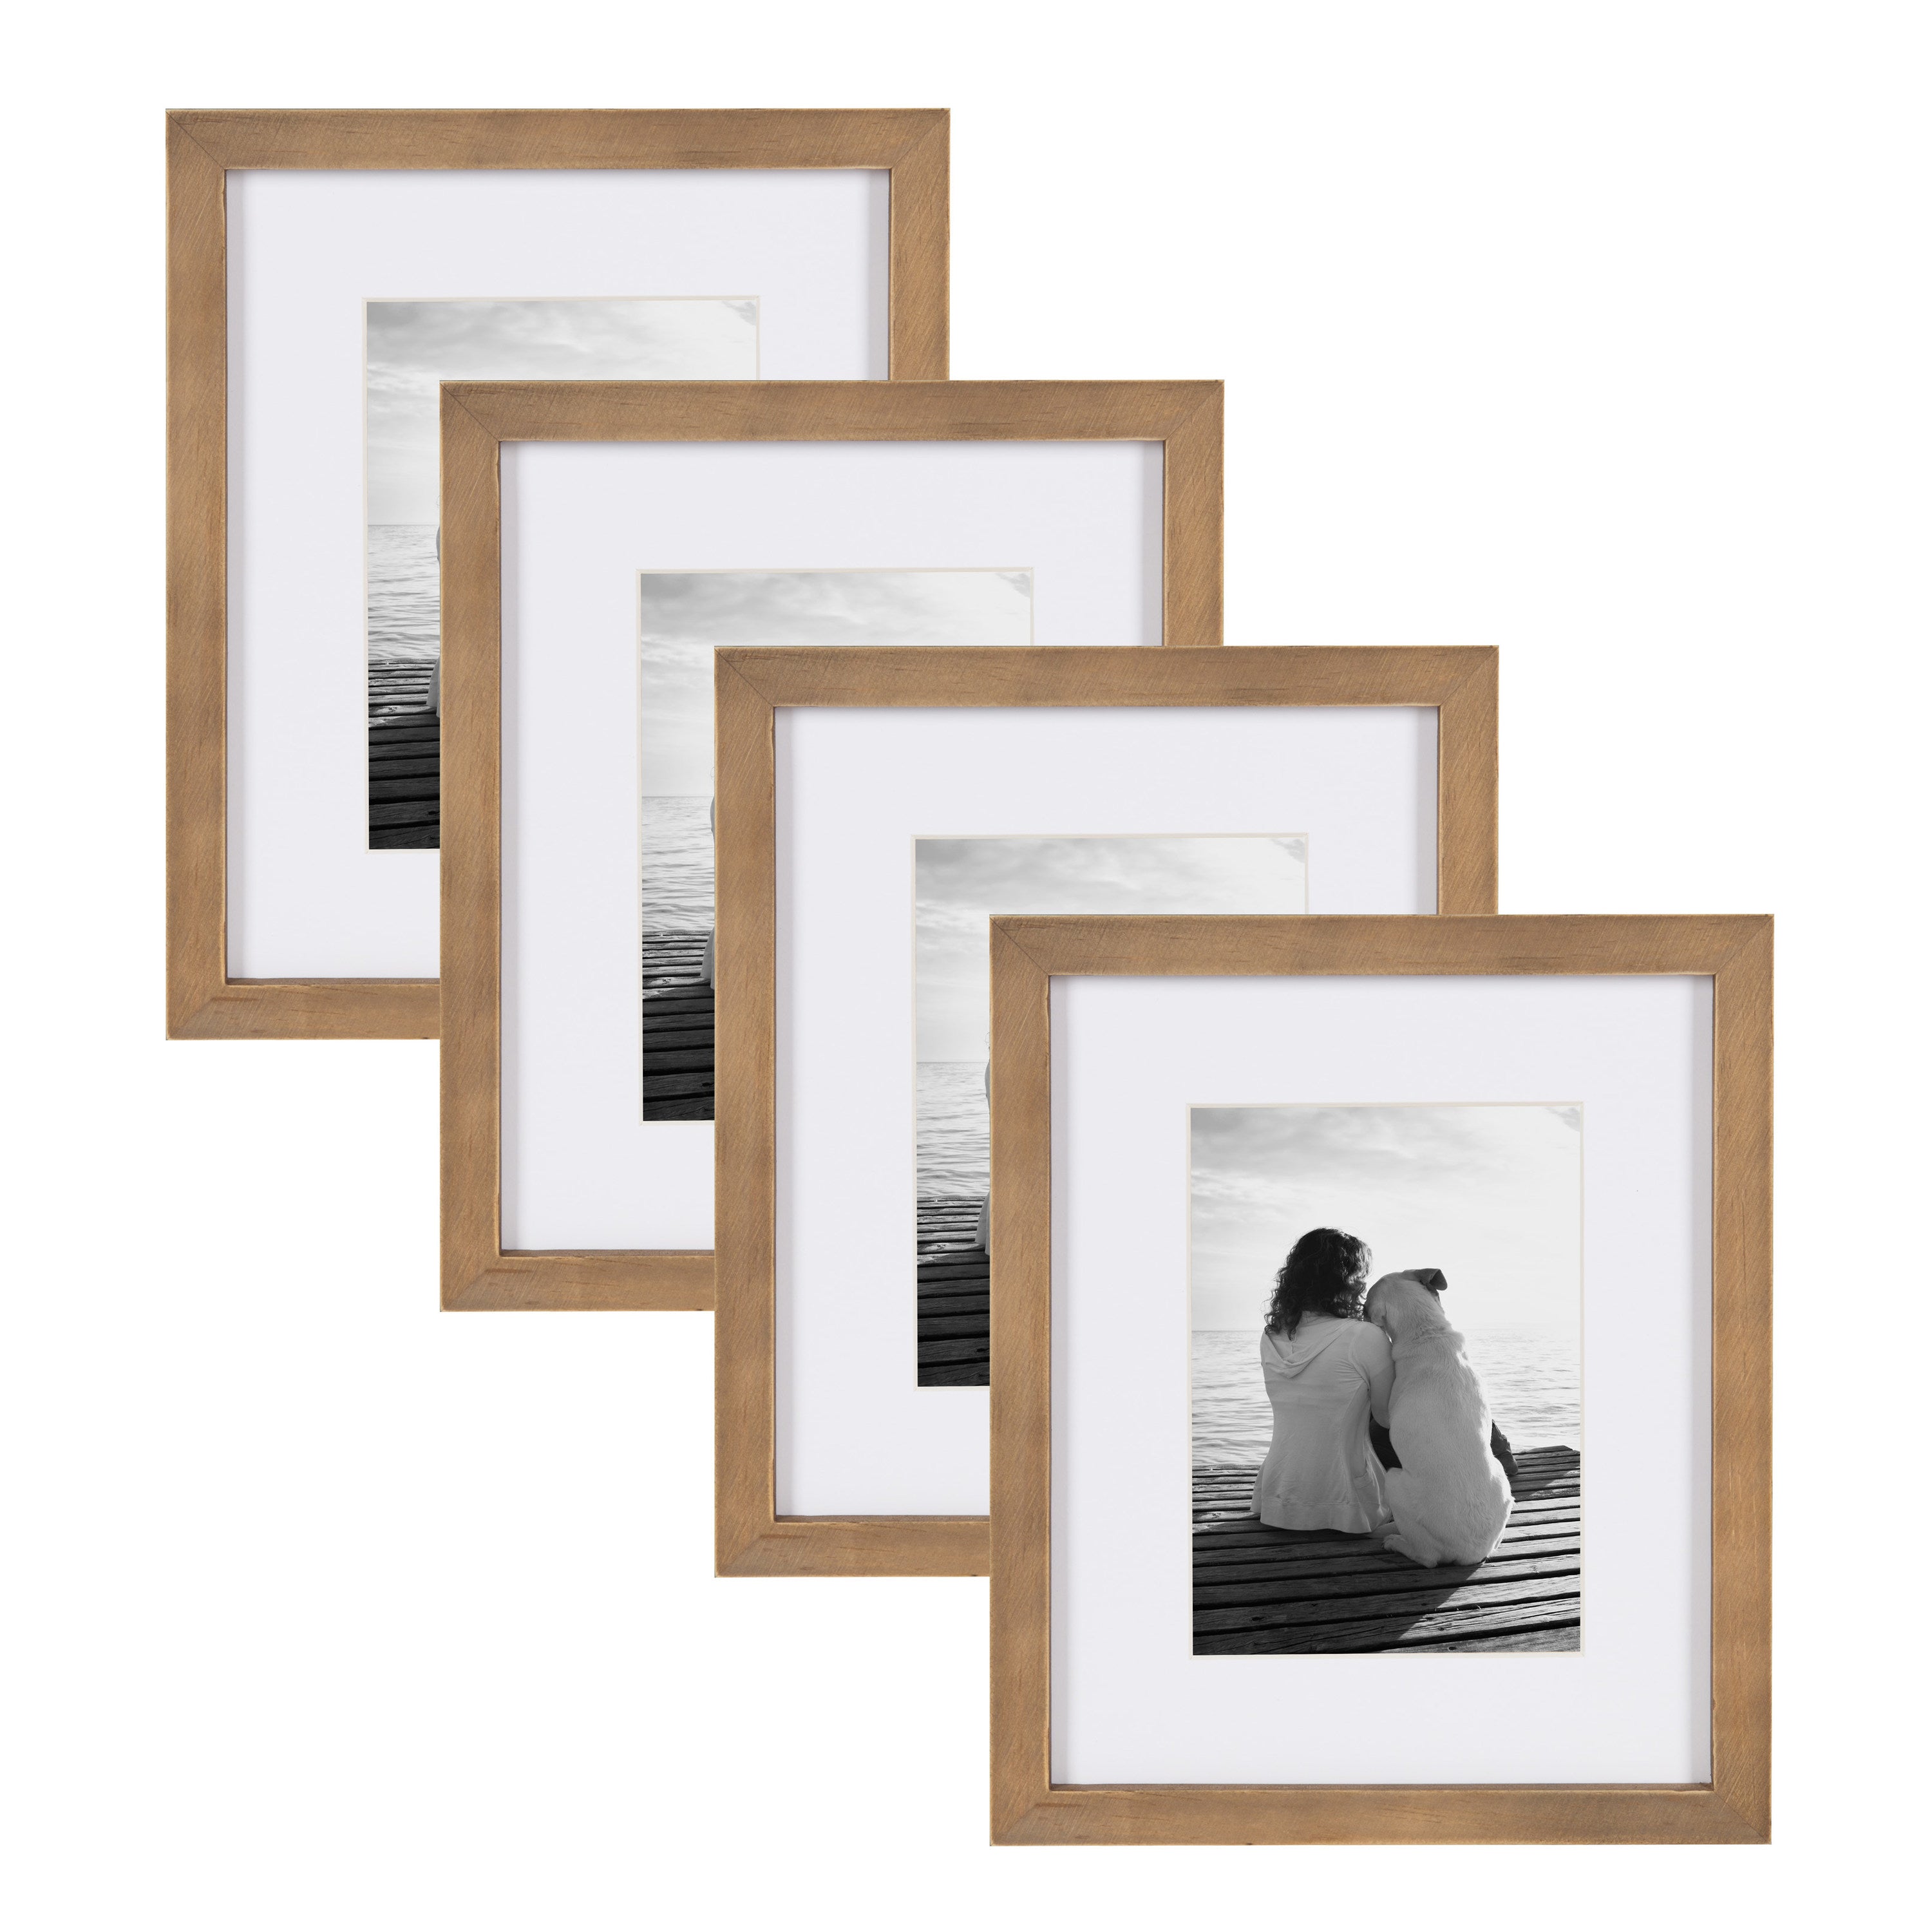 11 X 14 Matted To 8 X 10 Single Picture Gallery Frame - Threshold™ :  Target